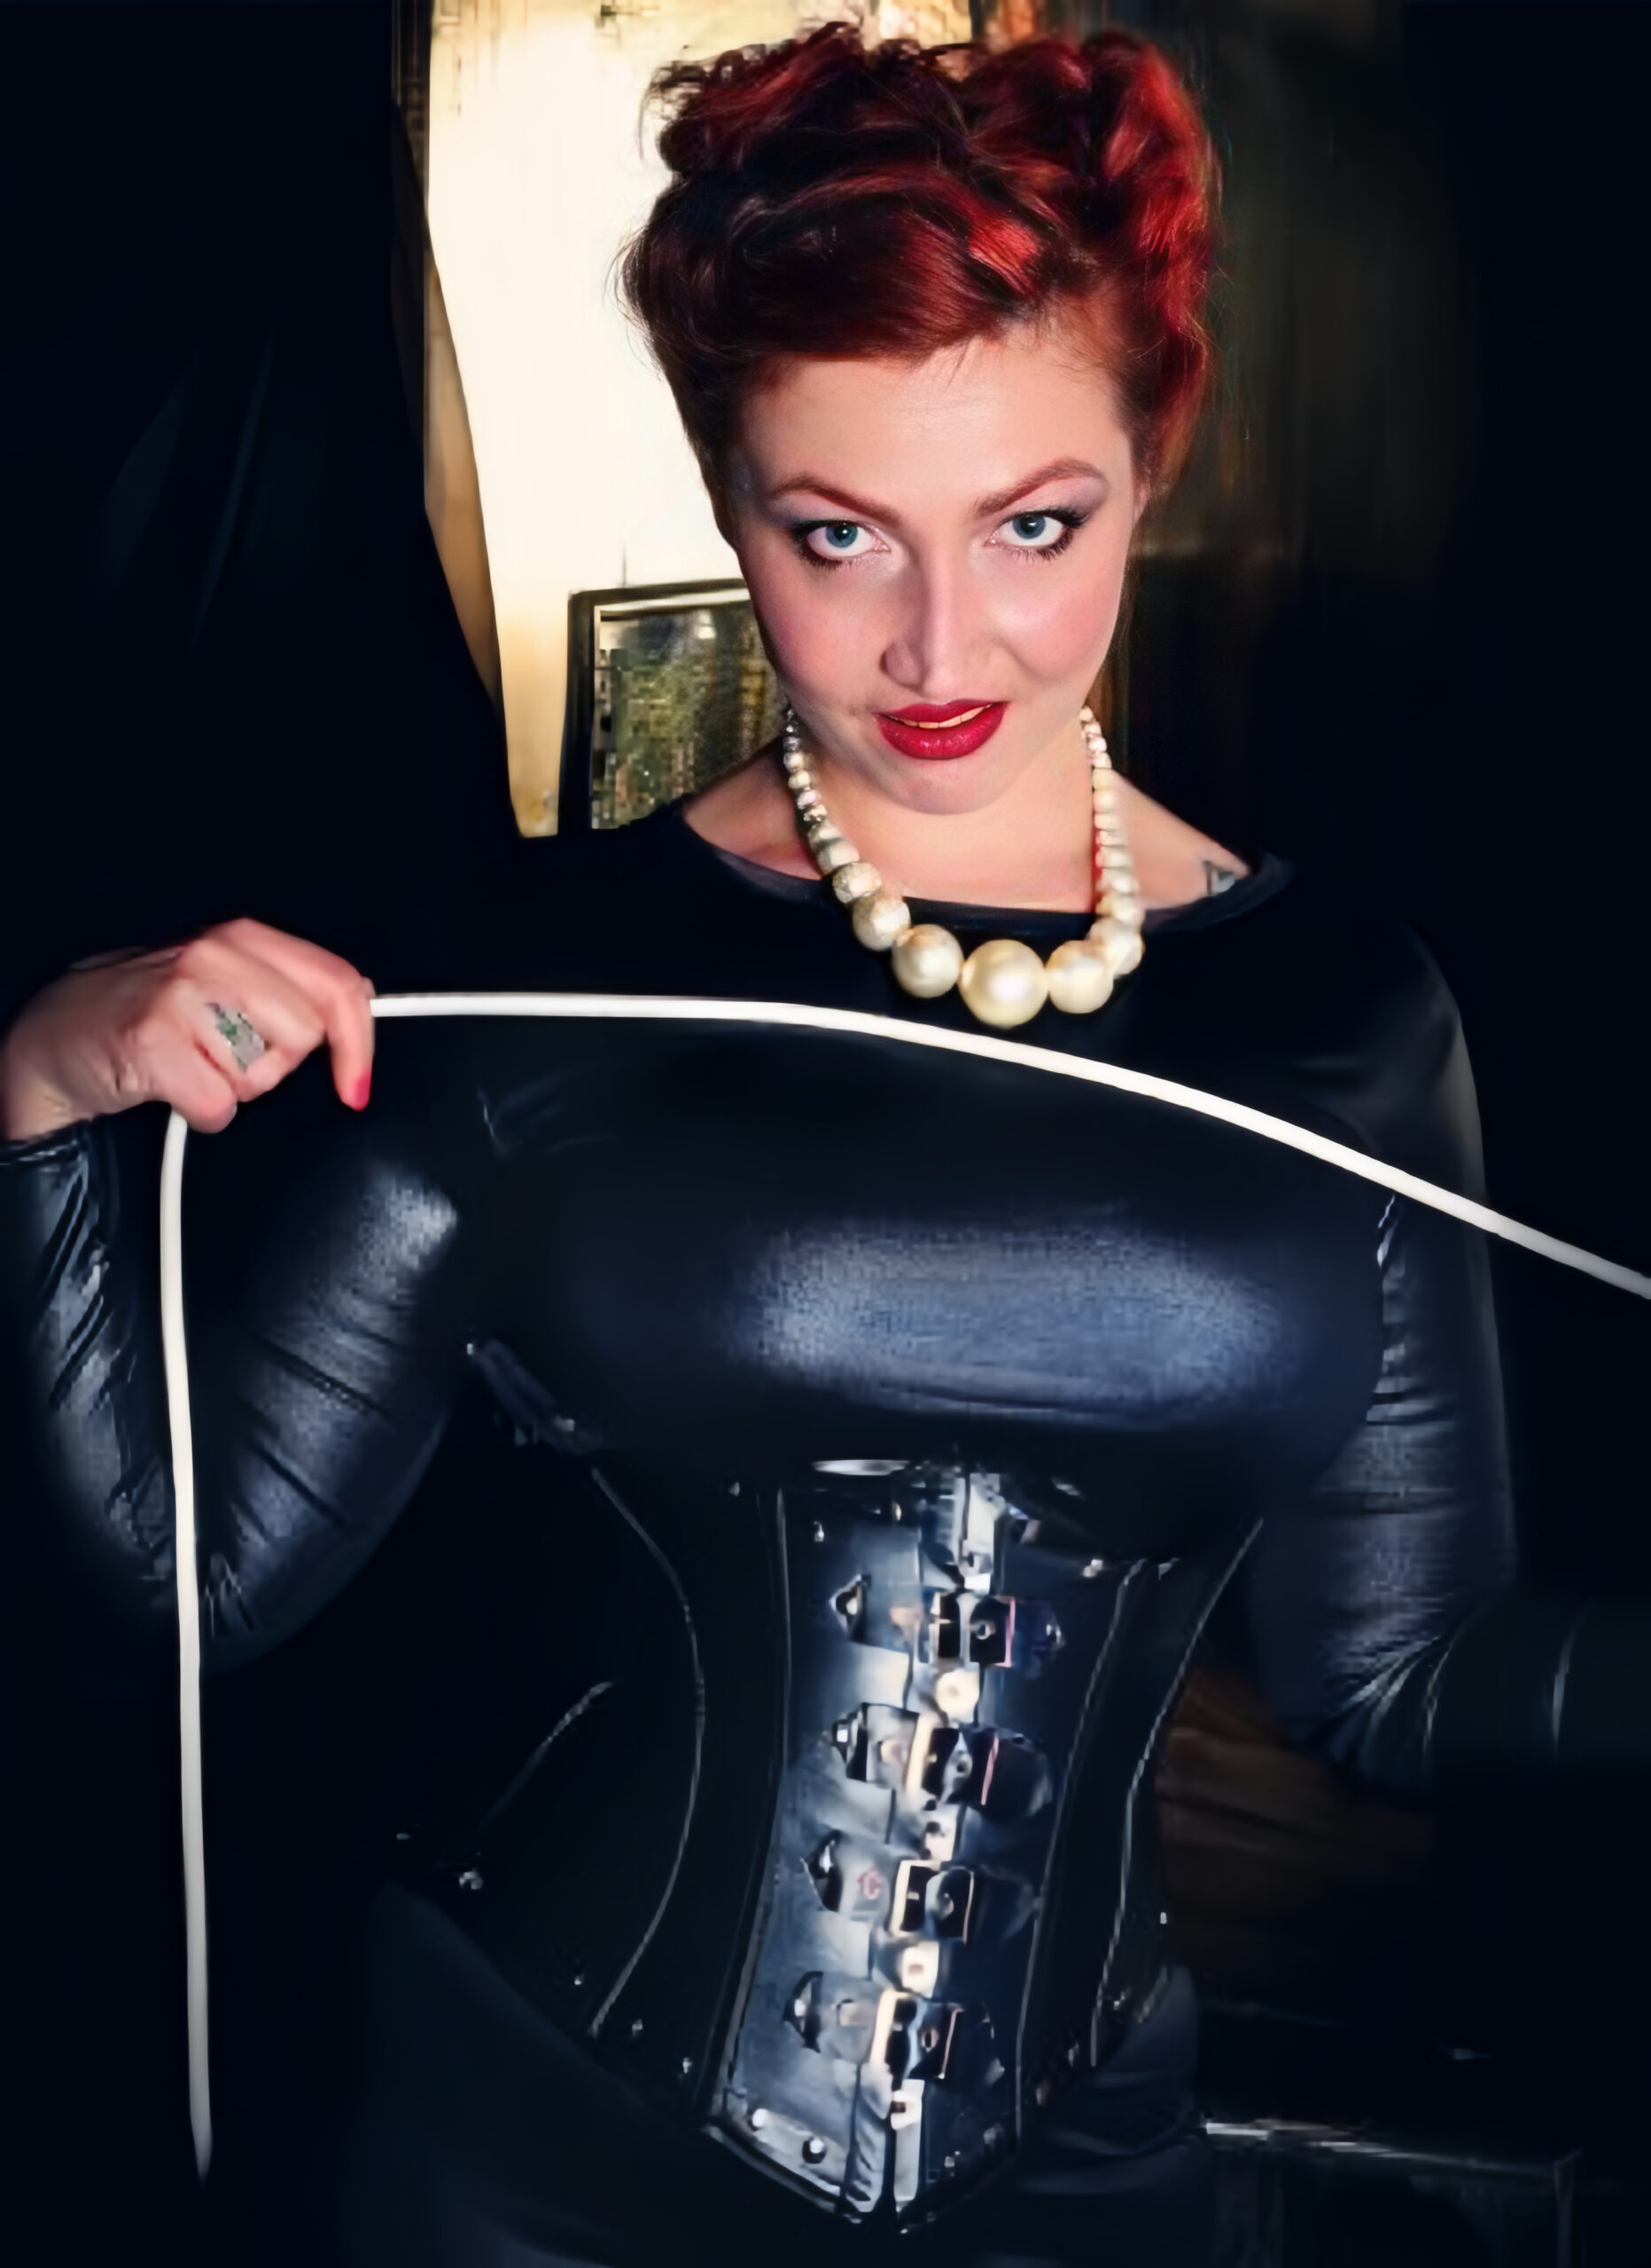 Front-facing photo of Madam Helle, wearing a tight black dress, black corset, and a string of pearls. She is looking into the camera and holding a white rope.